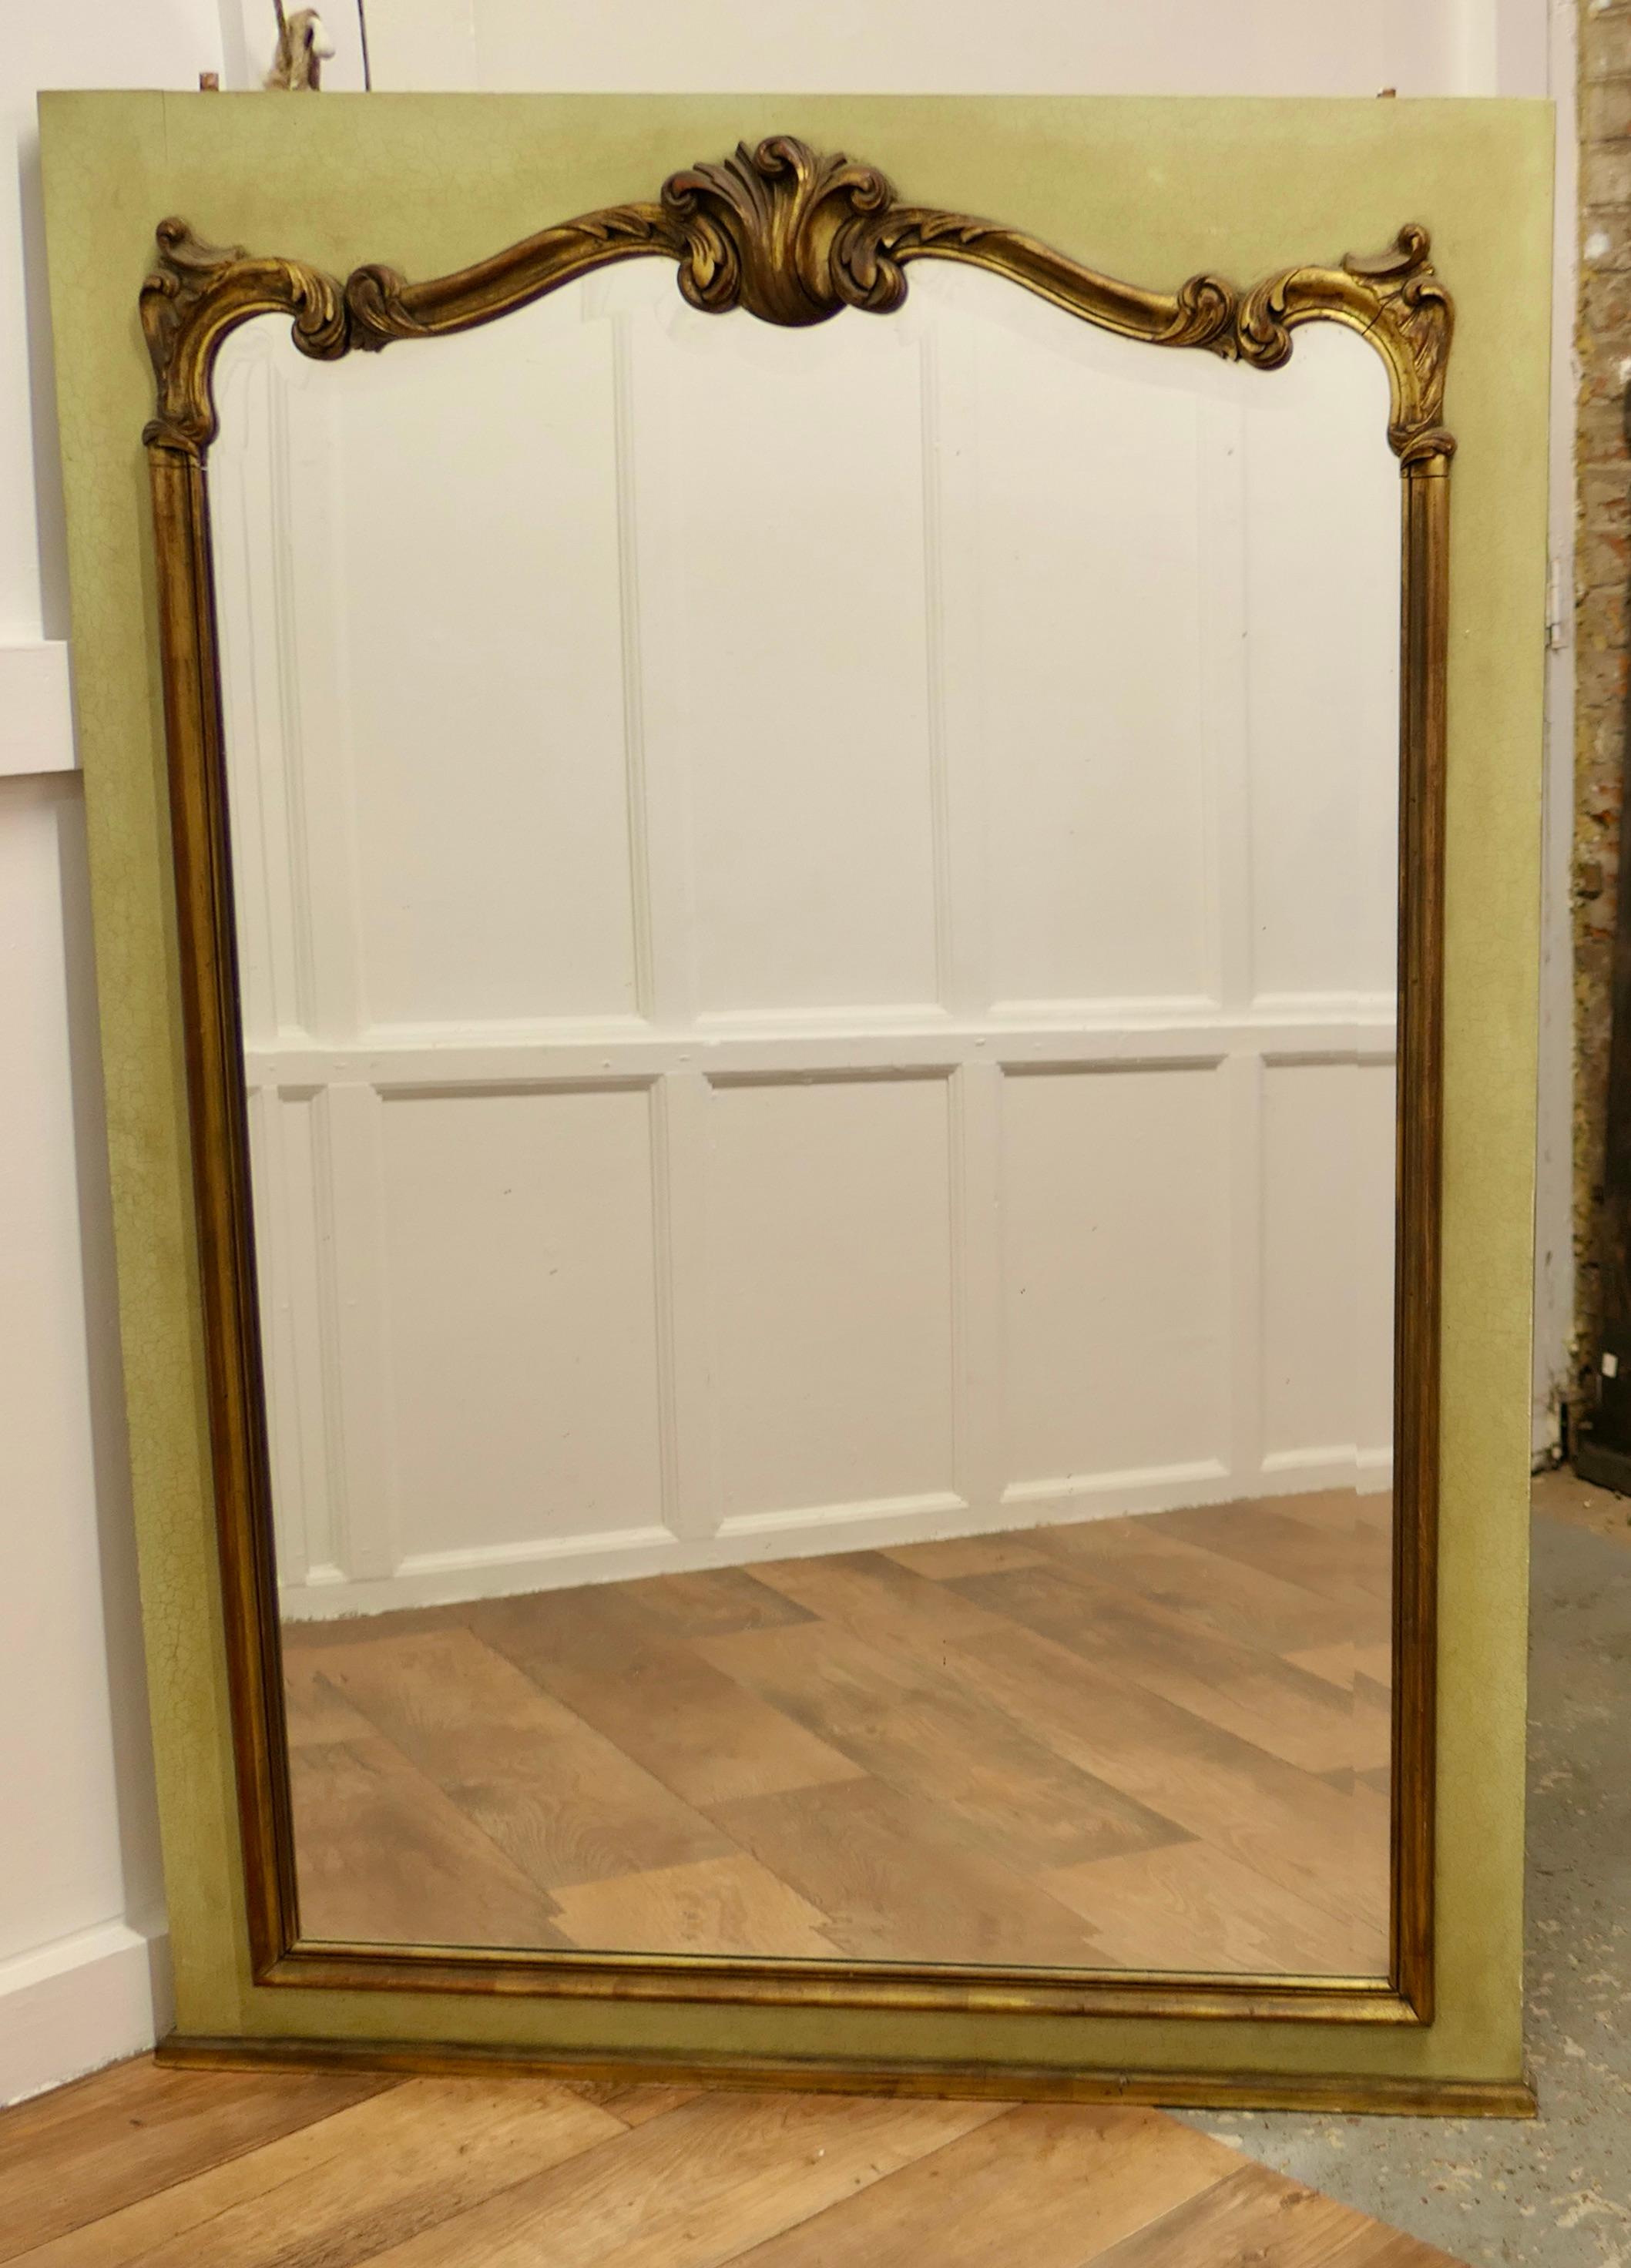 Gilt and Crackle Paint Mirror Mounted Wall Panel 

This French piece has been rescued from a 19th century panelled room
The panel has been set with a decorative gilt frame on crackle painted pale green/ yellow

The panel would work very well as